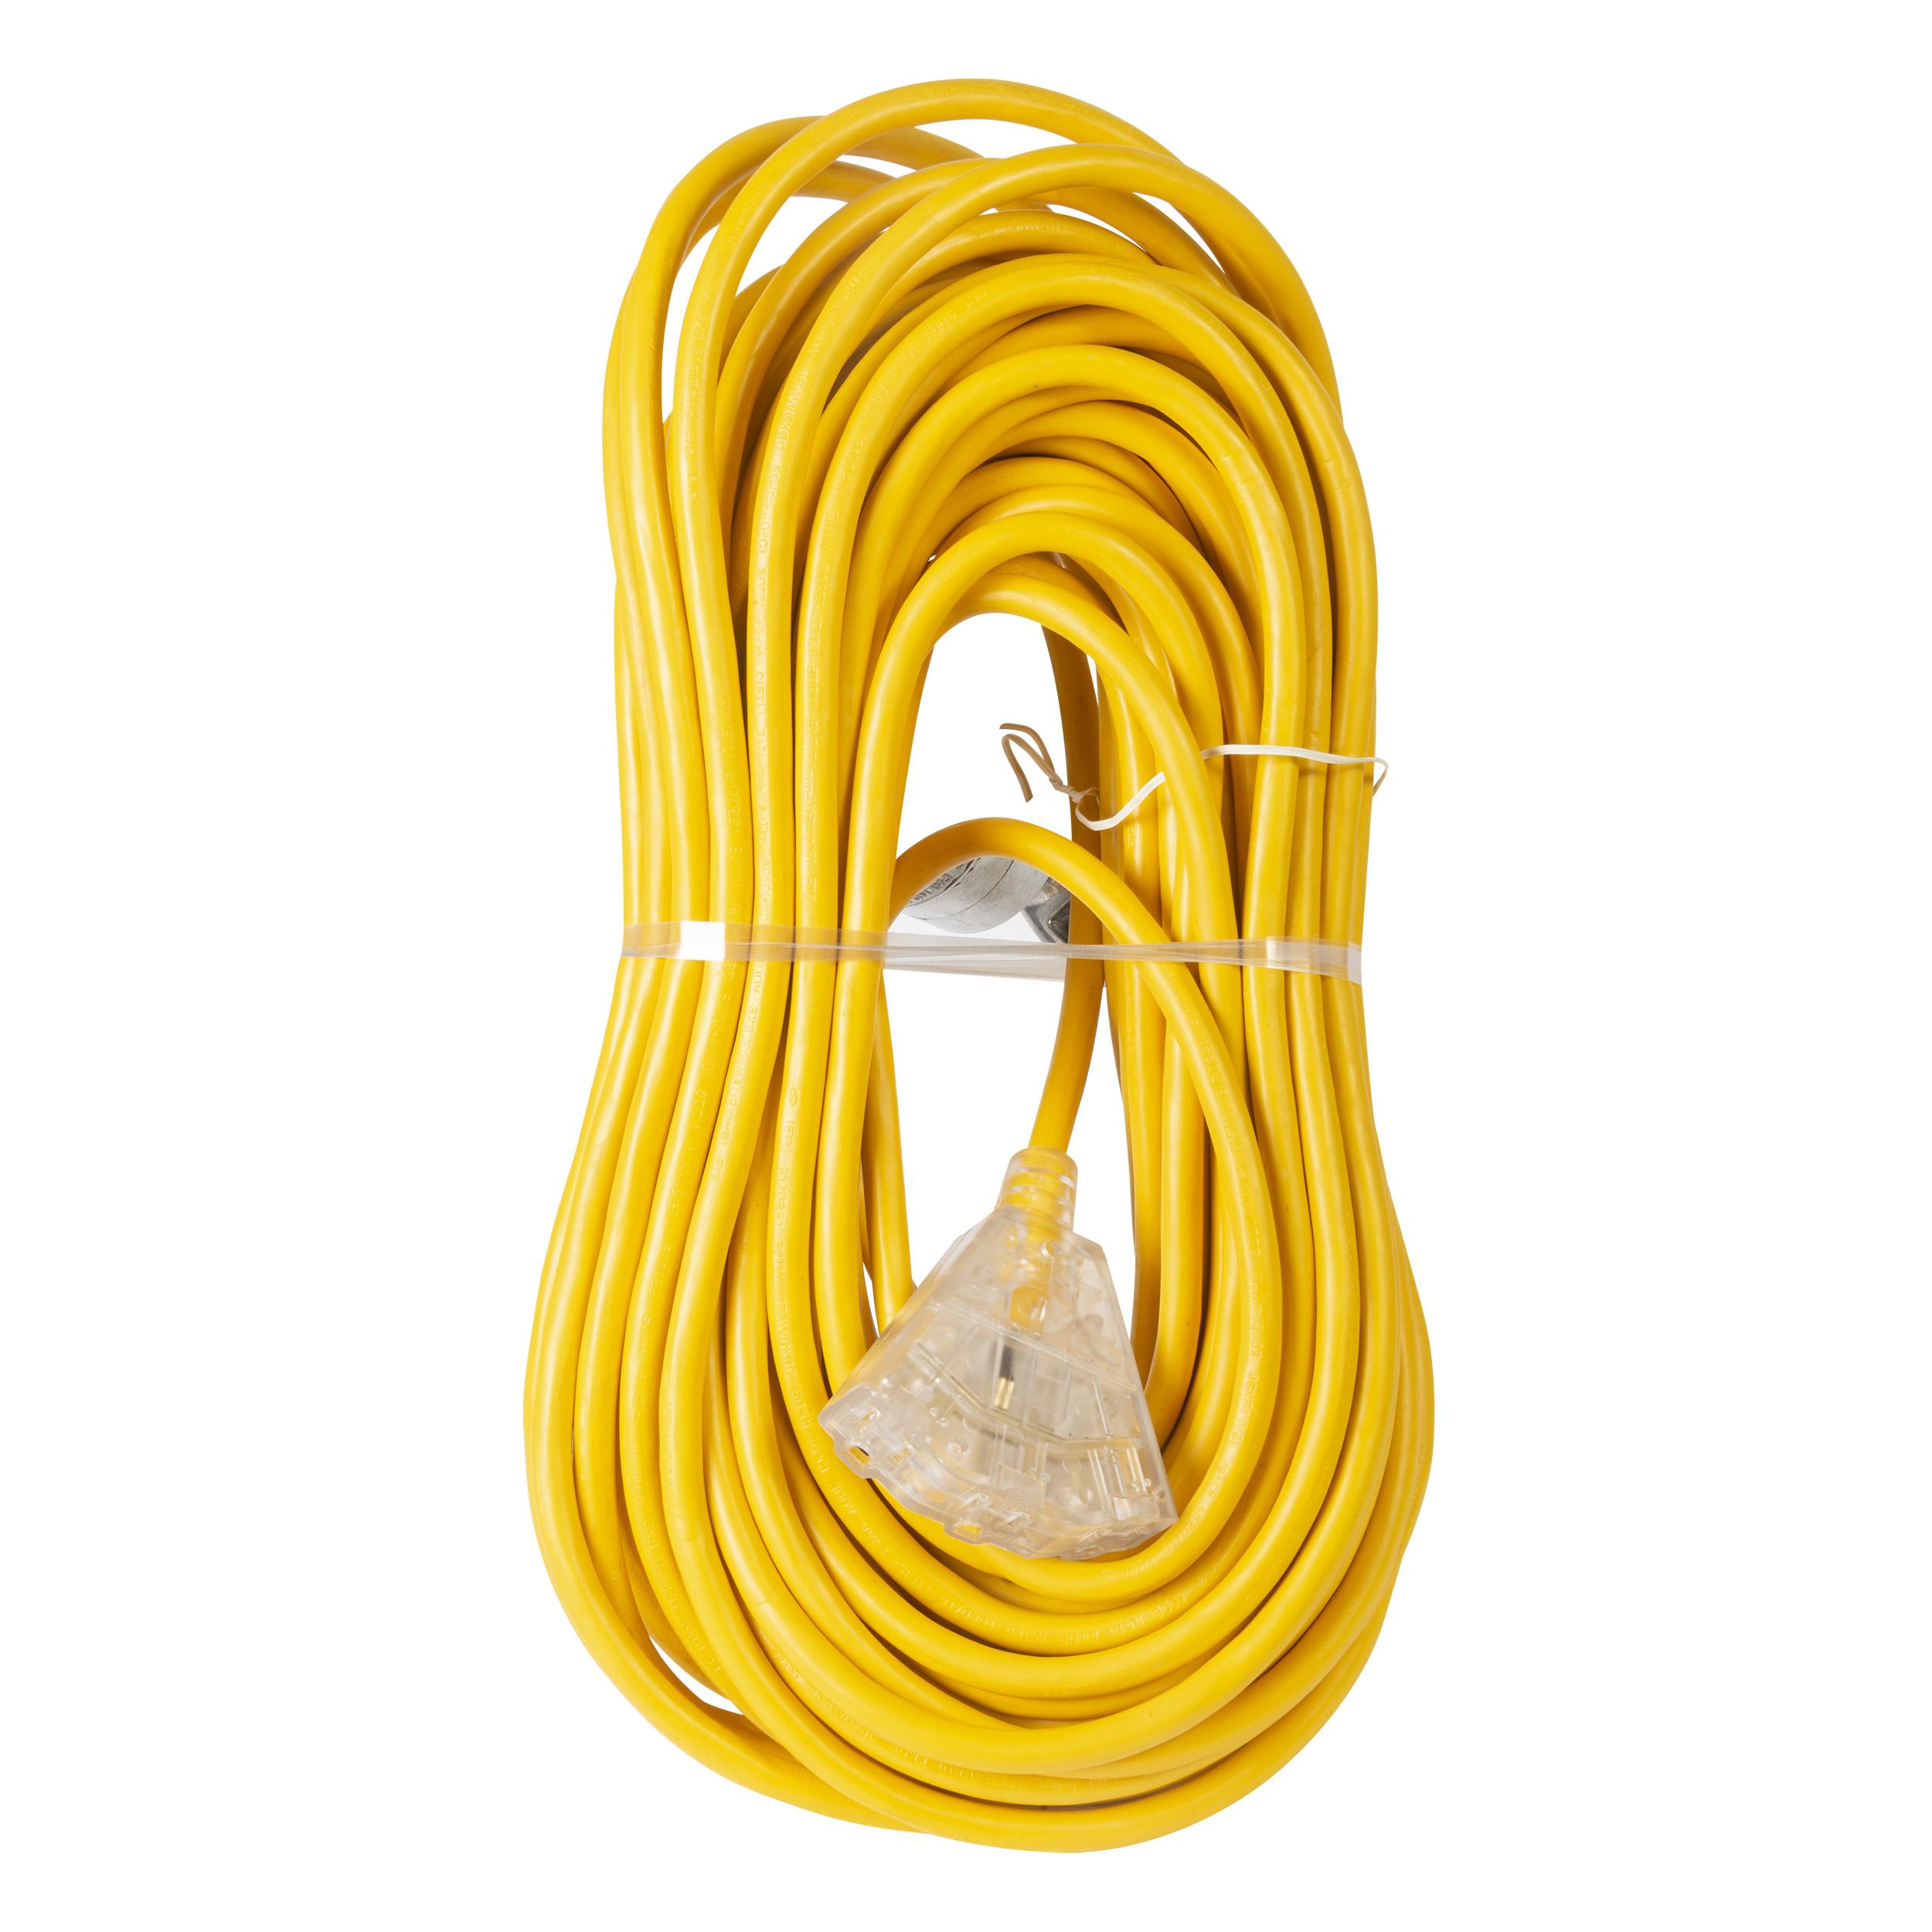 Channellock 100 Ft. 12/3 Extension Cord - Town Hardware & General Store